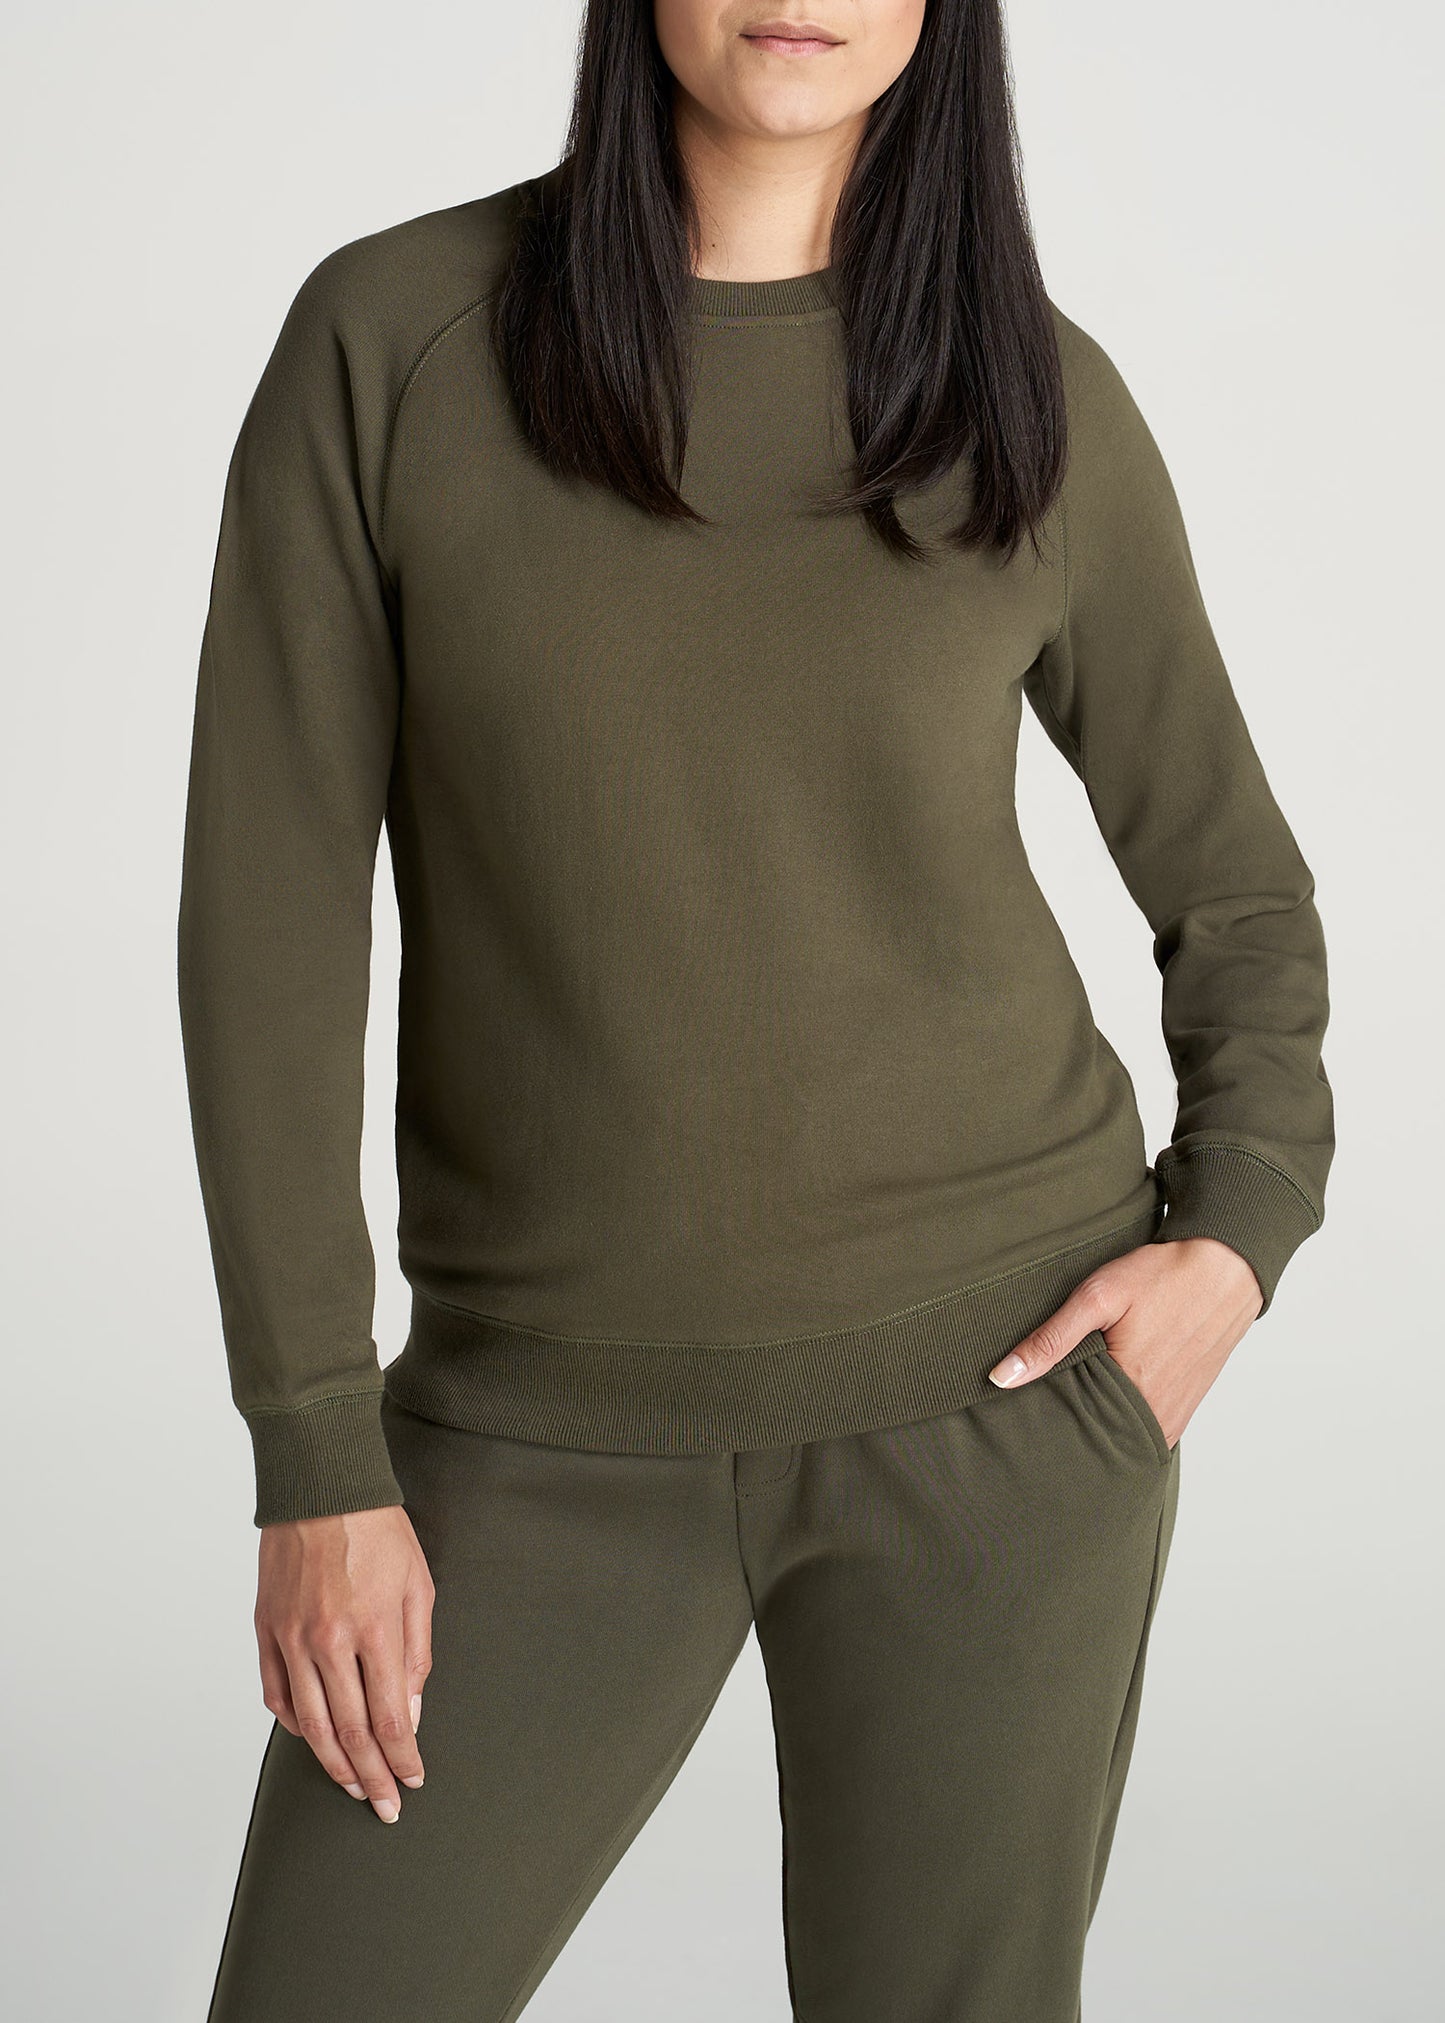 American-Tall-Women-Womens-FrenchTerry-CrewNeck-FernGreen-front